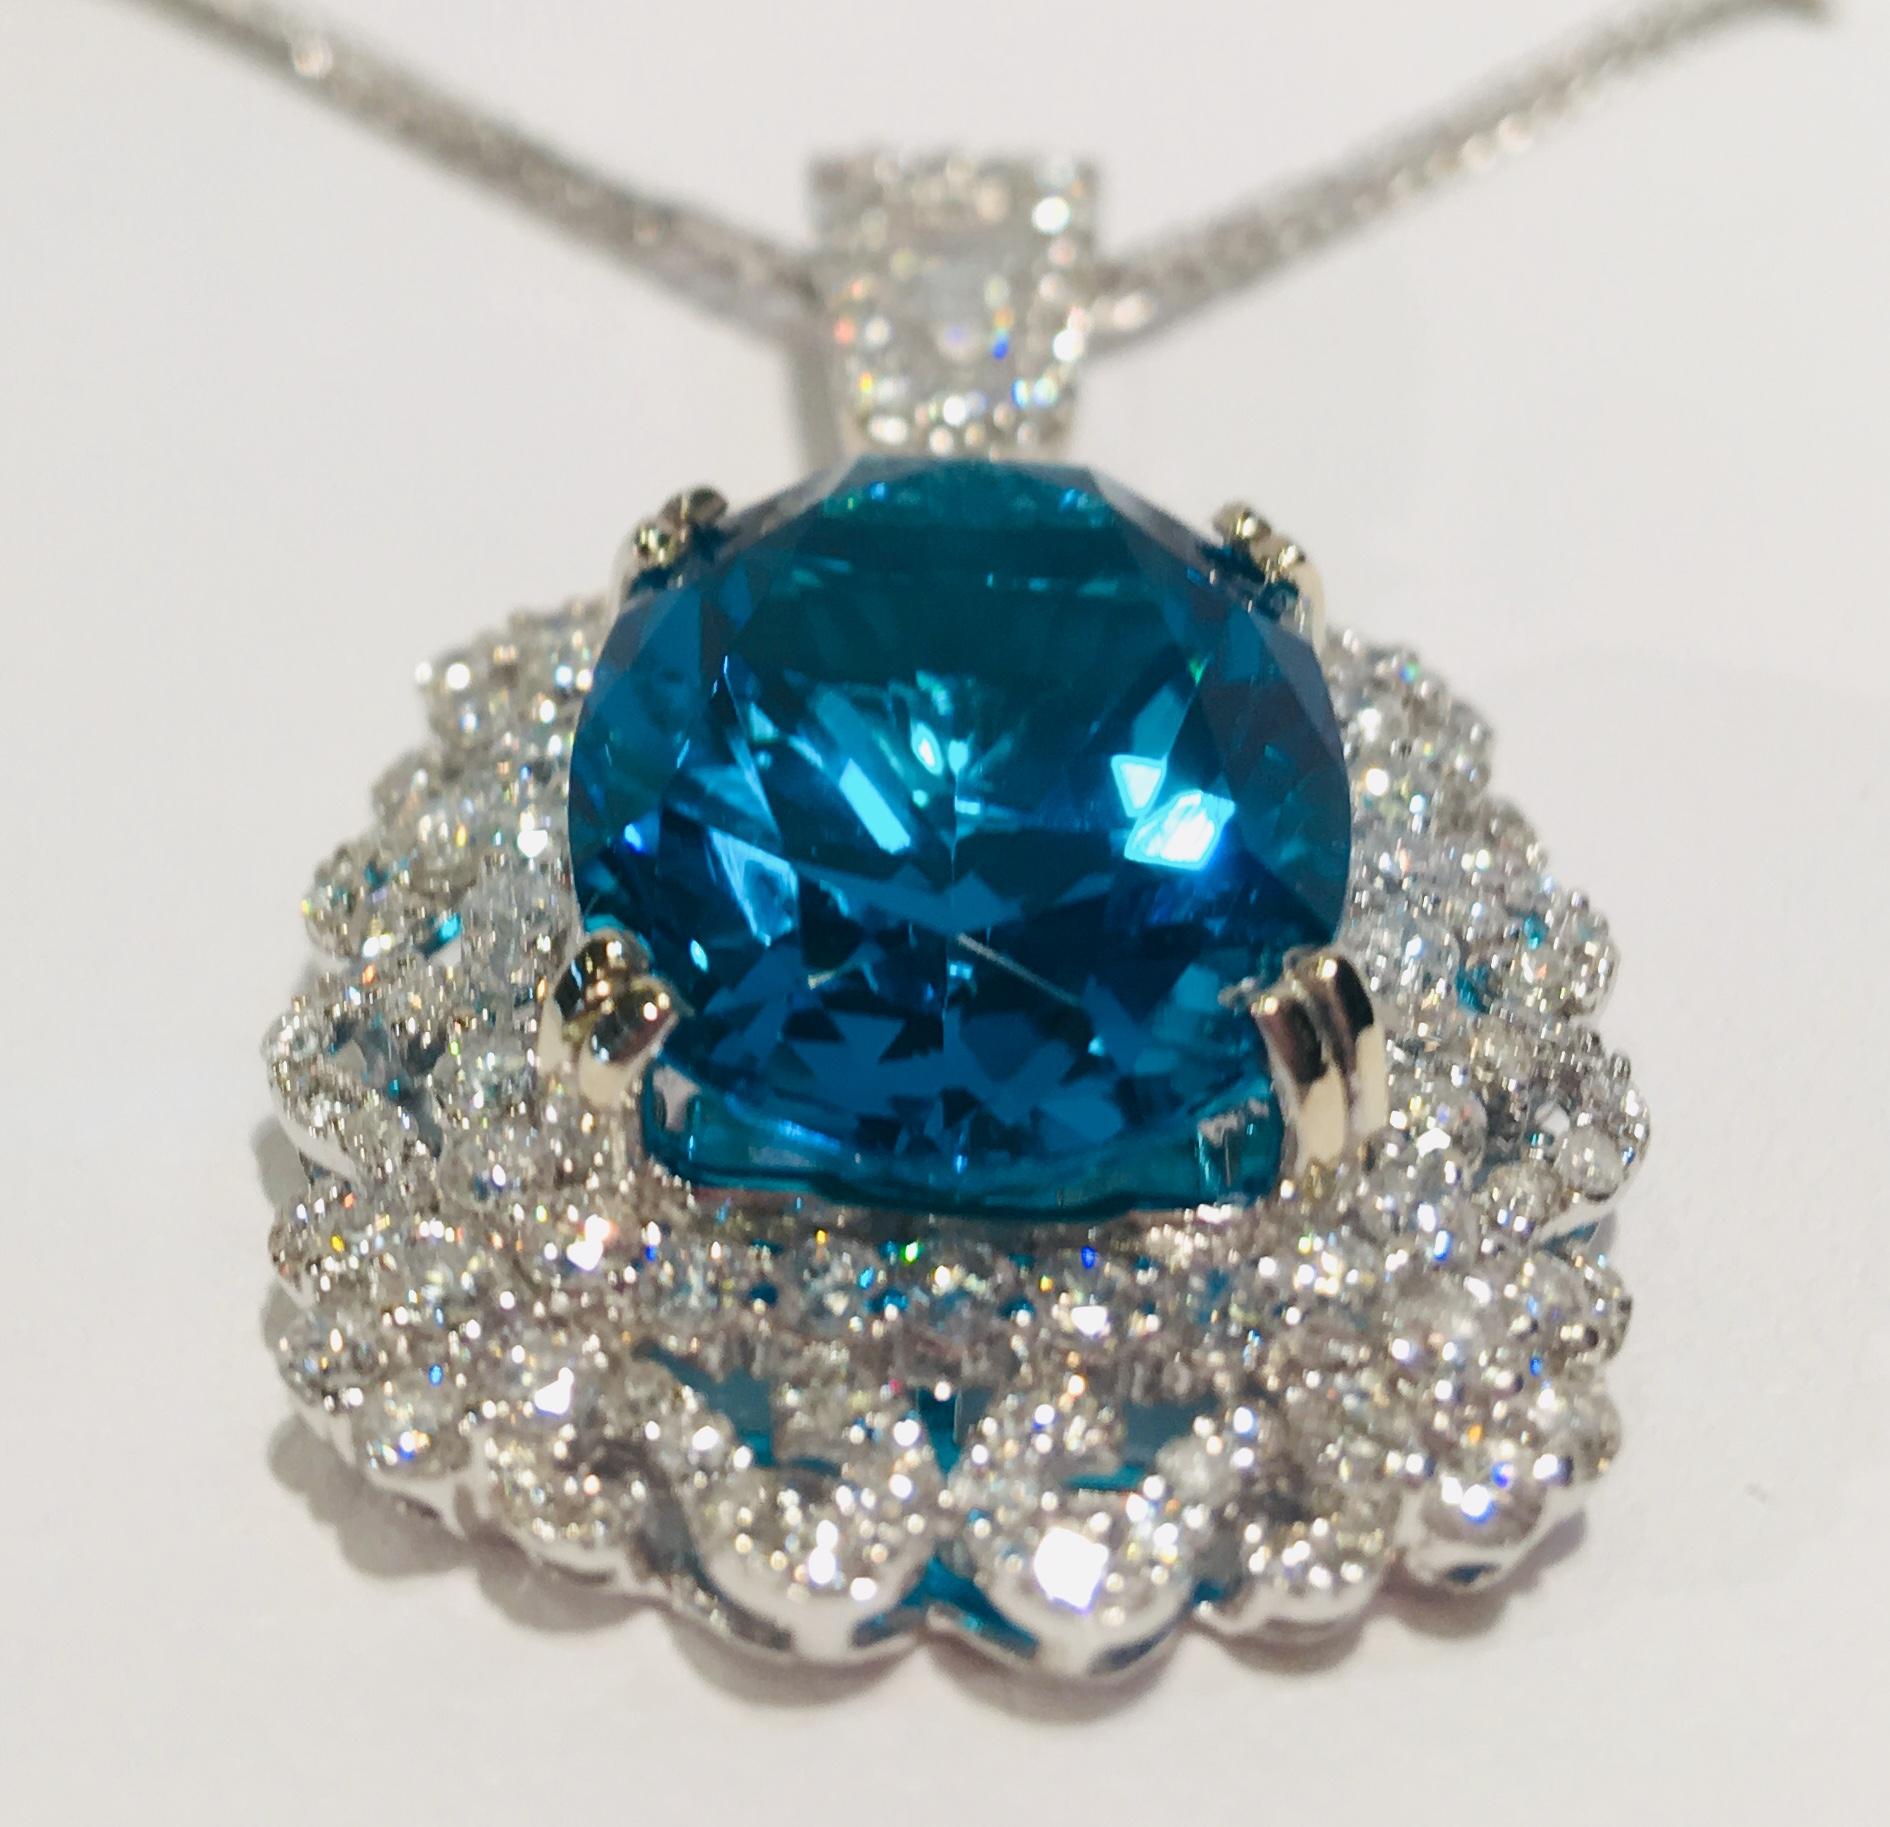 A huge, oval cut, deeply saturated teal color apatite is talon prong set in 18 karat white gold and surrounded by a fantastic halo of round brilliant diamonds set in an openwork, curlicued, floral pattern and accented by a large, tapered diamond